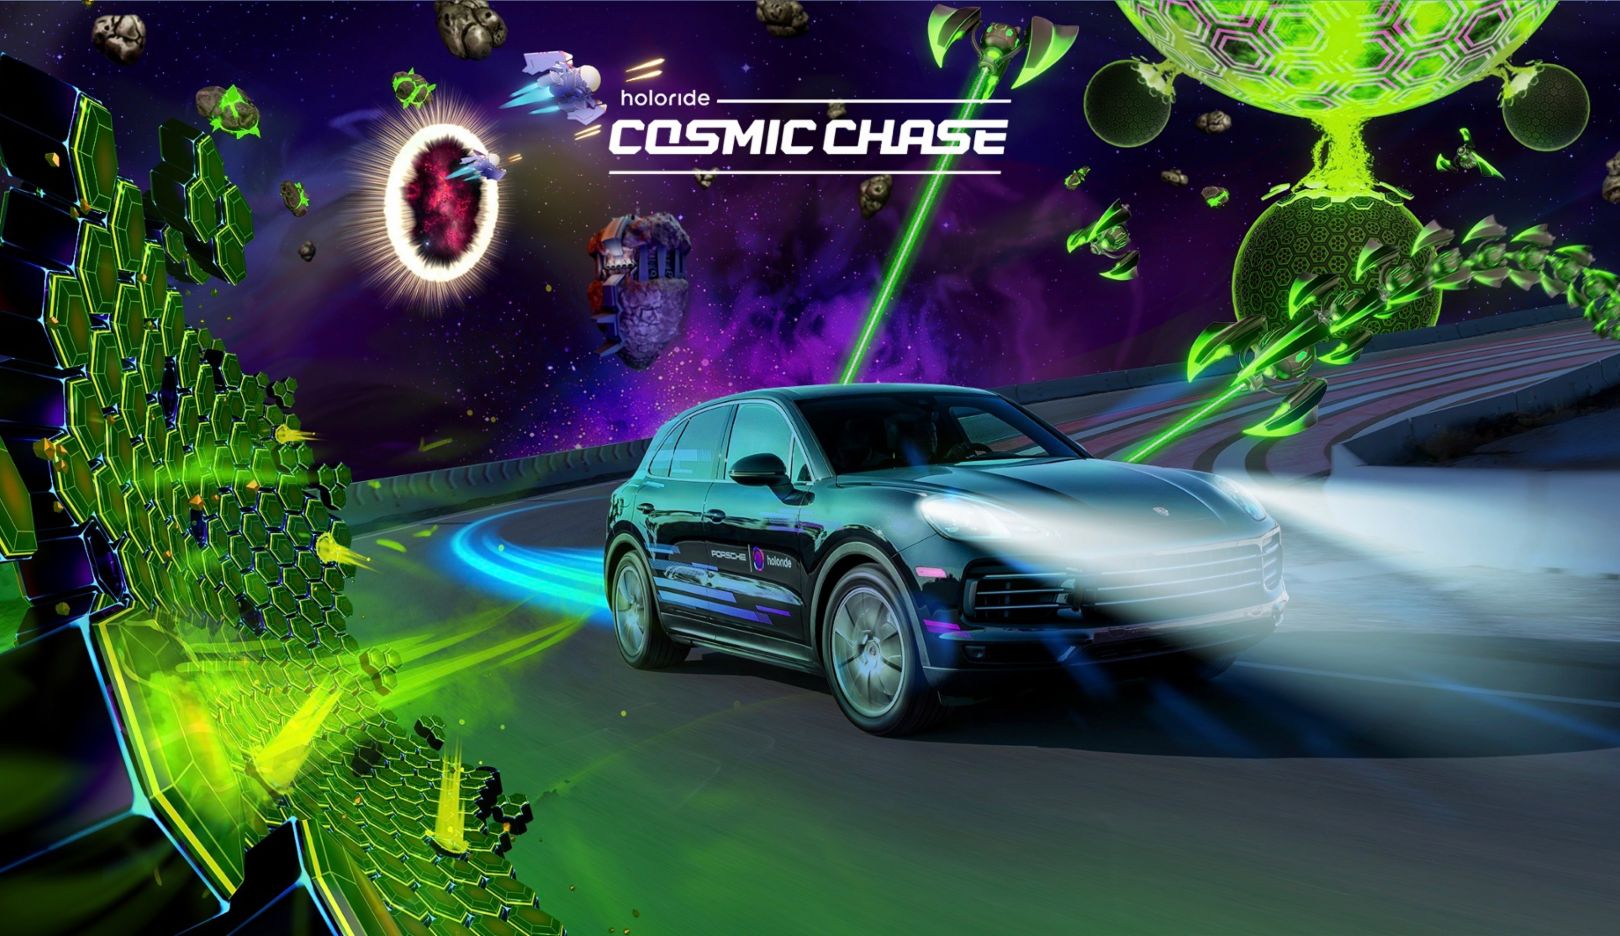 Cayenne S, Holoride, Cosmic Chase, 2022, Porsche AG 